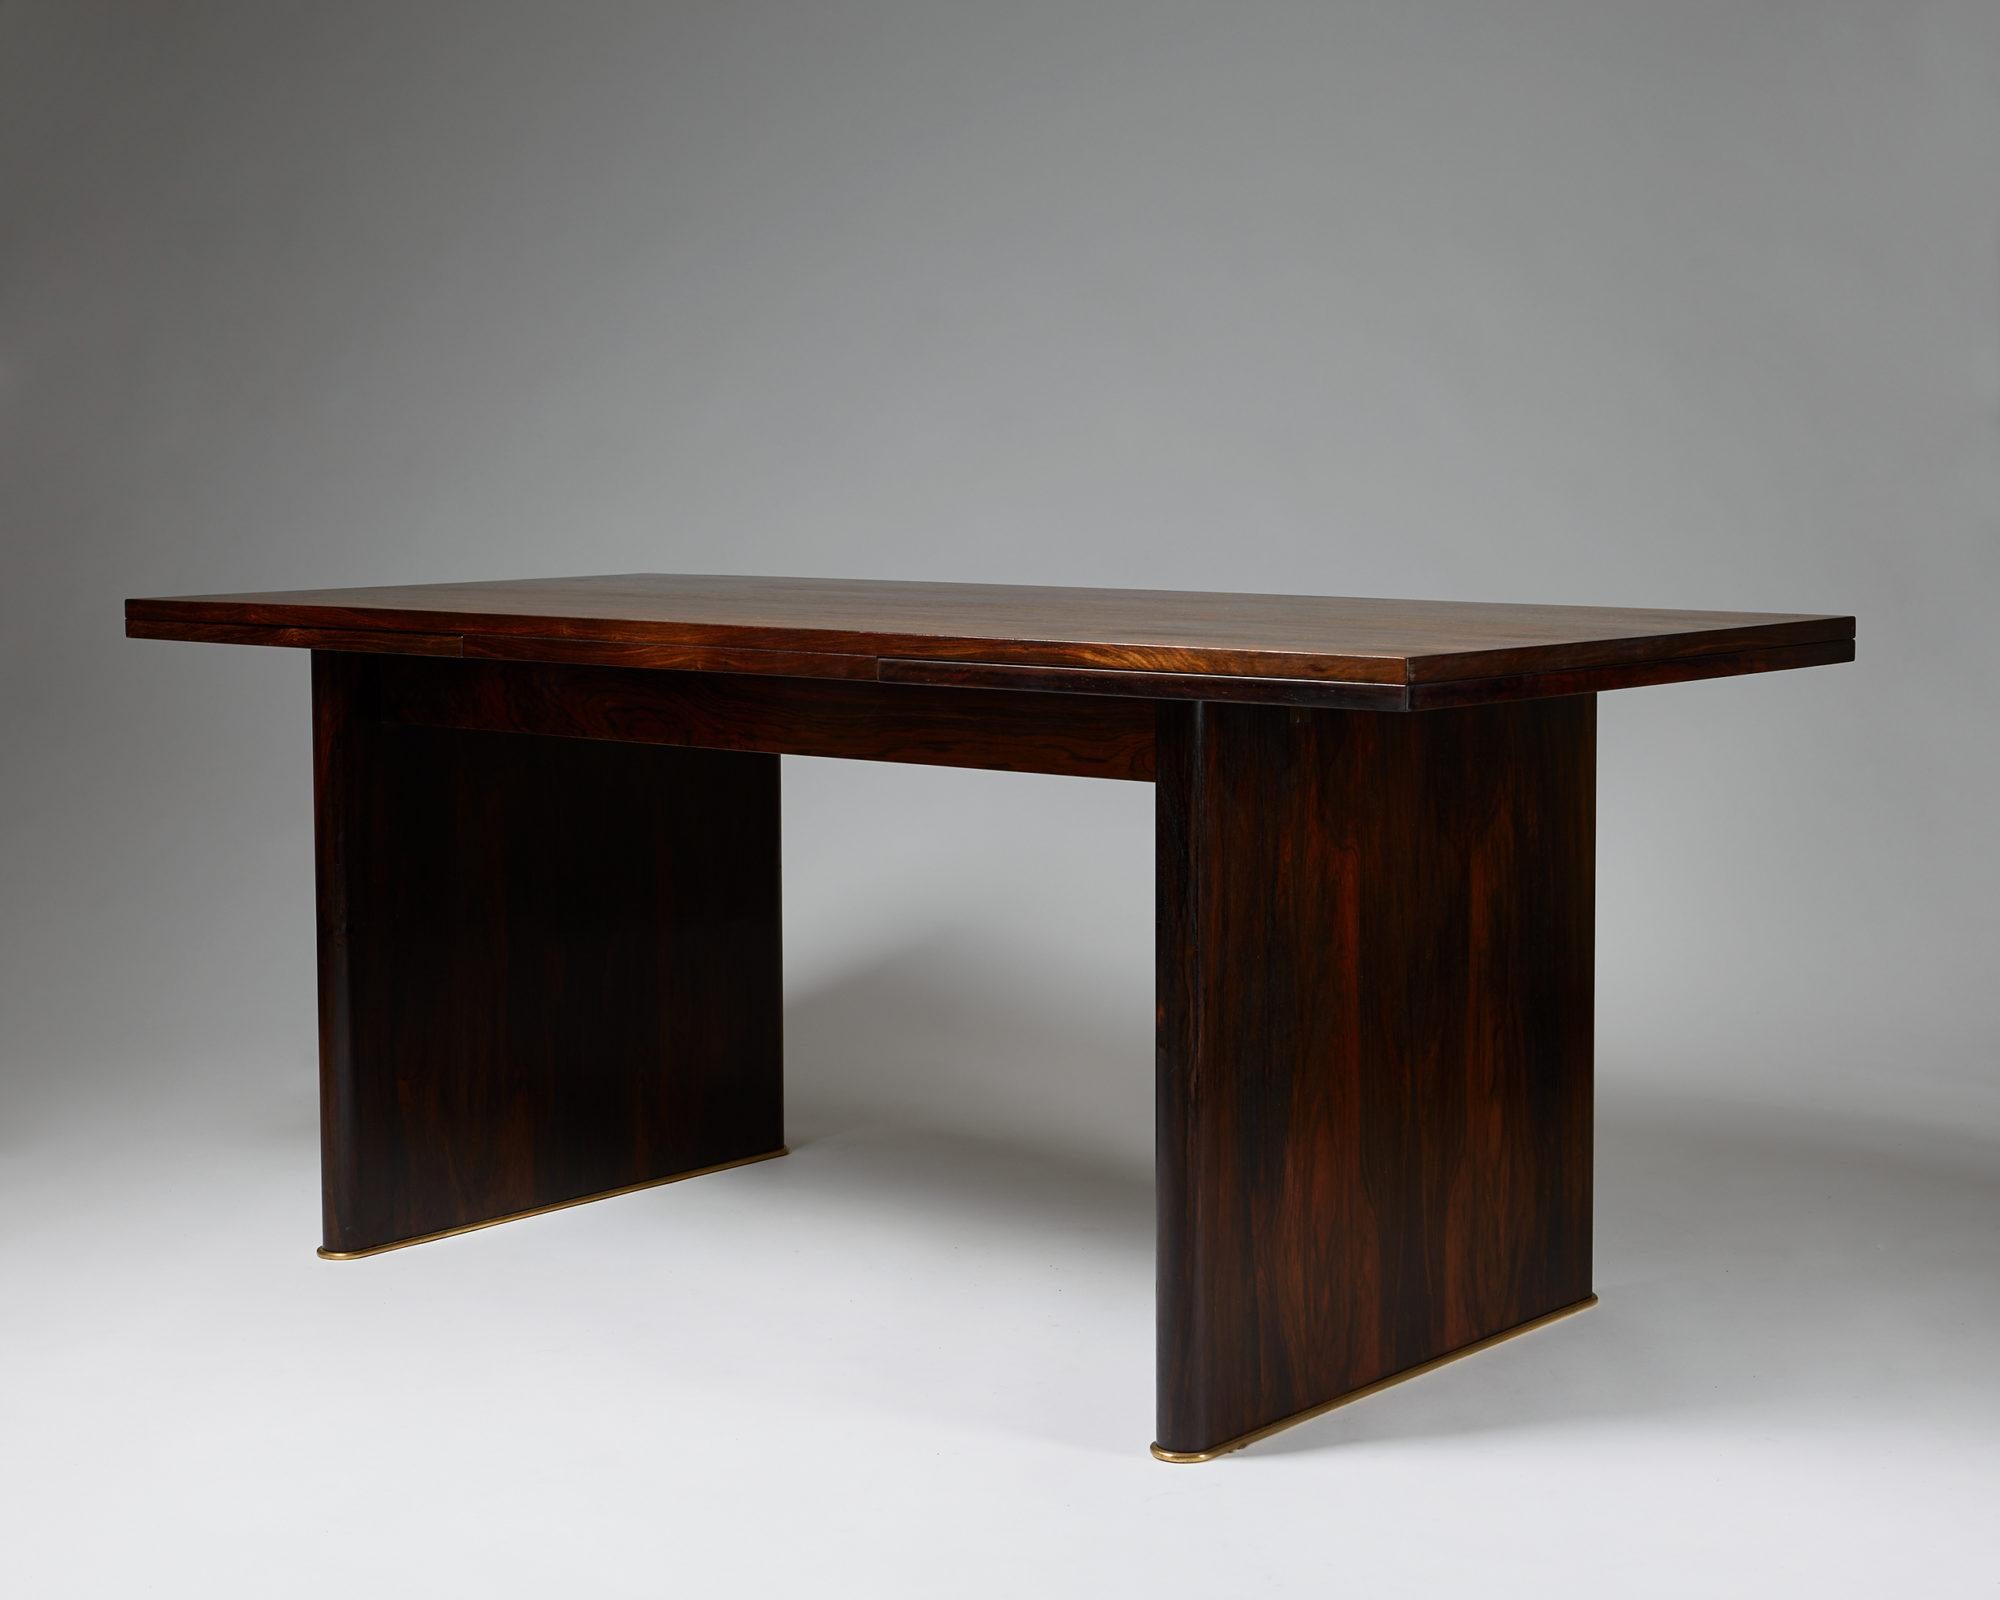 Dining table designed by Ernst Kühn for Lysberg, Hansen & Therp,
Denmark. 1930s.

Brazilian rosewood and brass base.

Measurements:
H: 76 cm/ 30''
L: 180-300 cm/ 5' 11'' - 9' 10 1/2''
D: 85 cm/ 33 1/2''

Provenance: Exhibited at the World Exposition